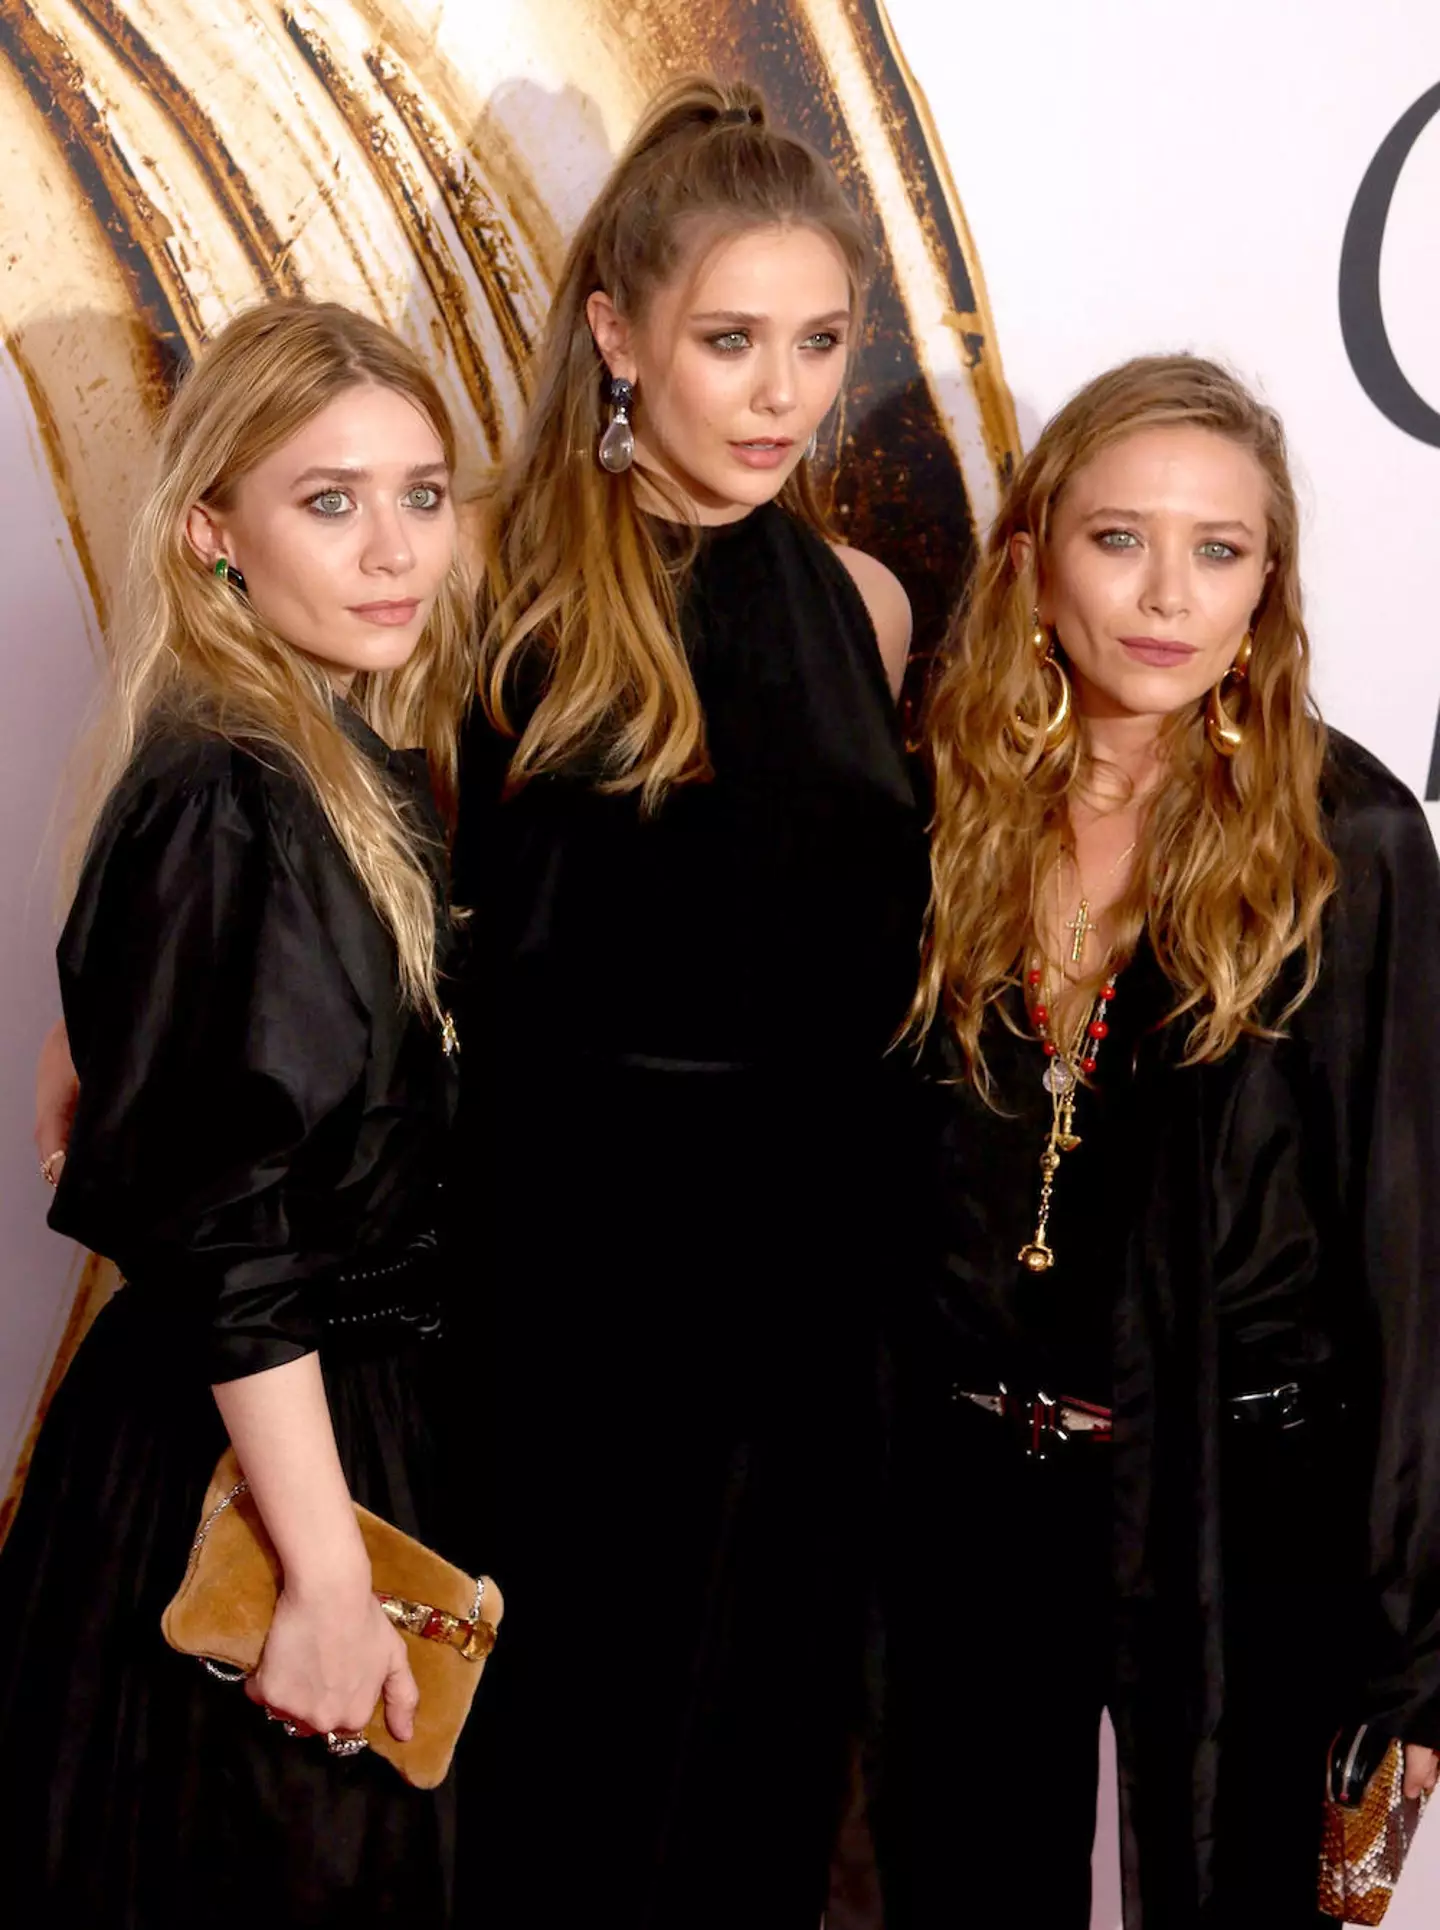 Did you know these three are sisters?